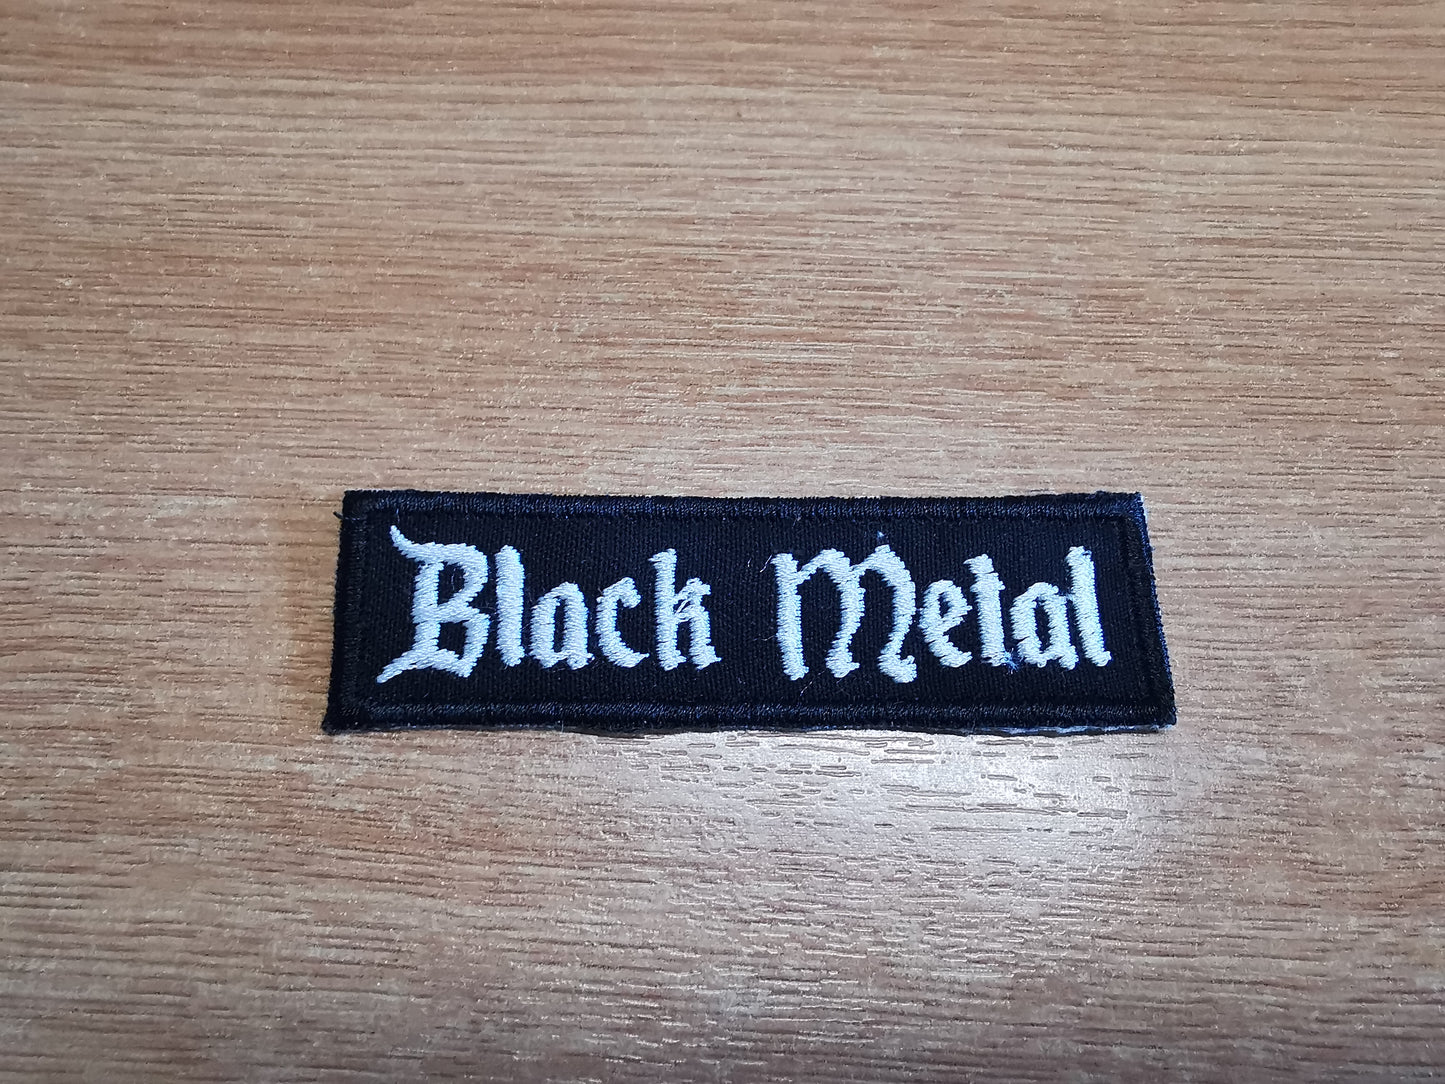 Black Metal Embroidered Patch Small in White